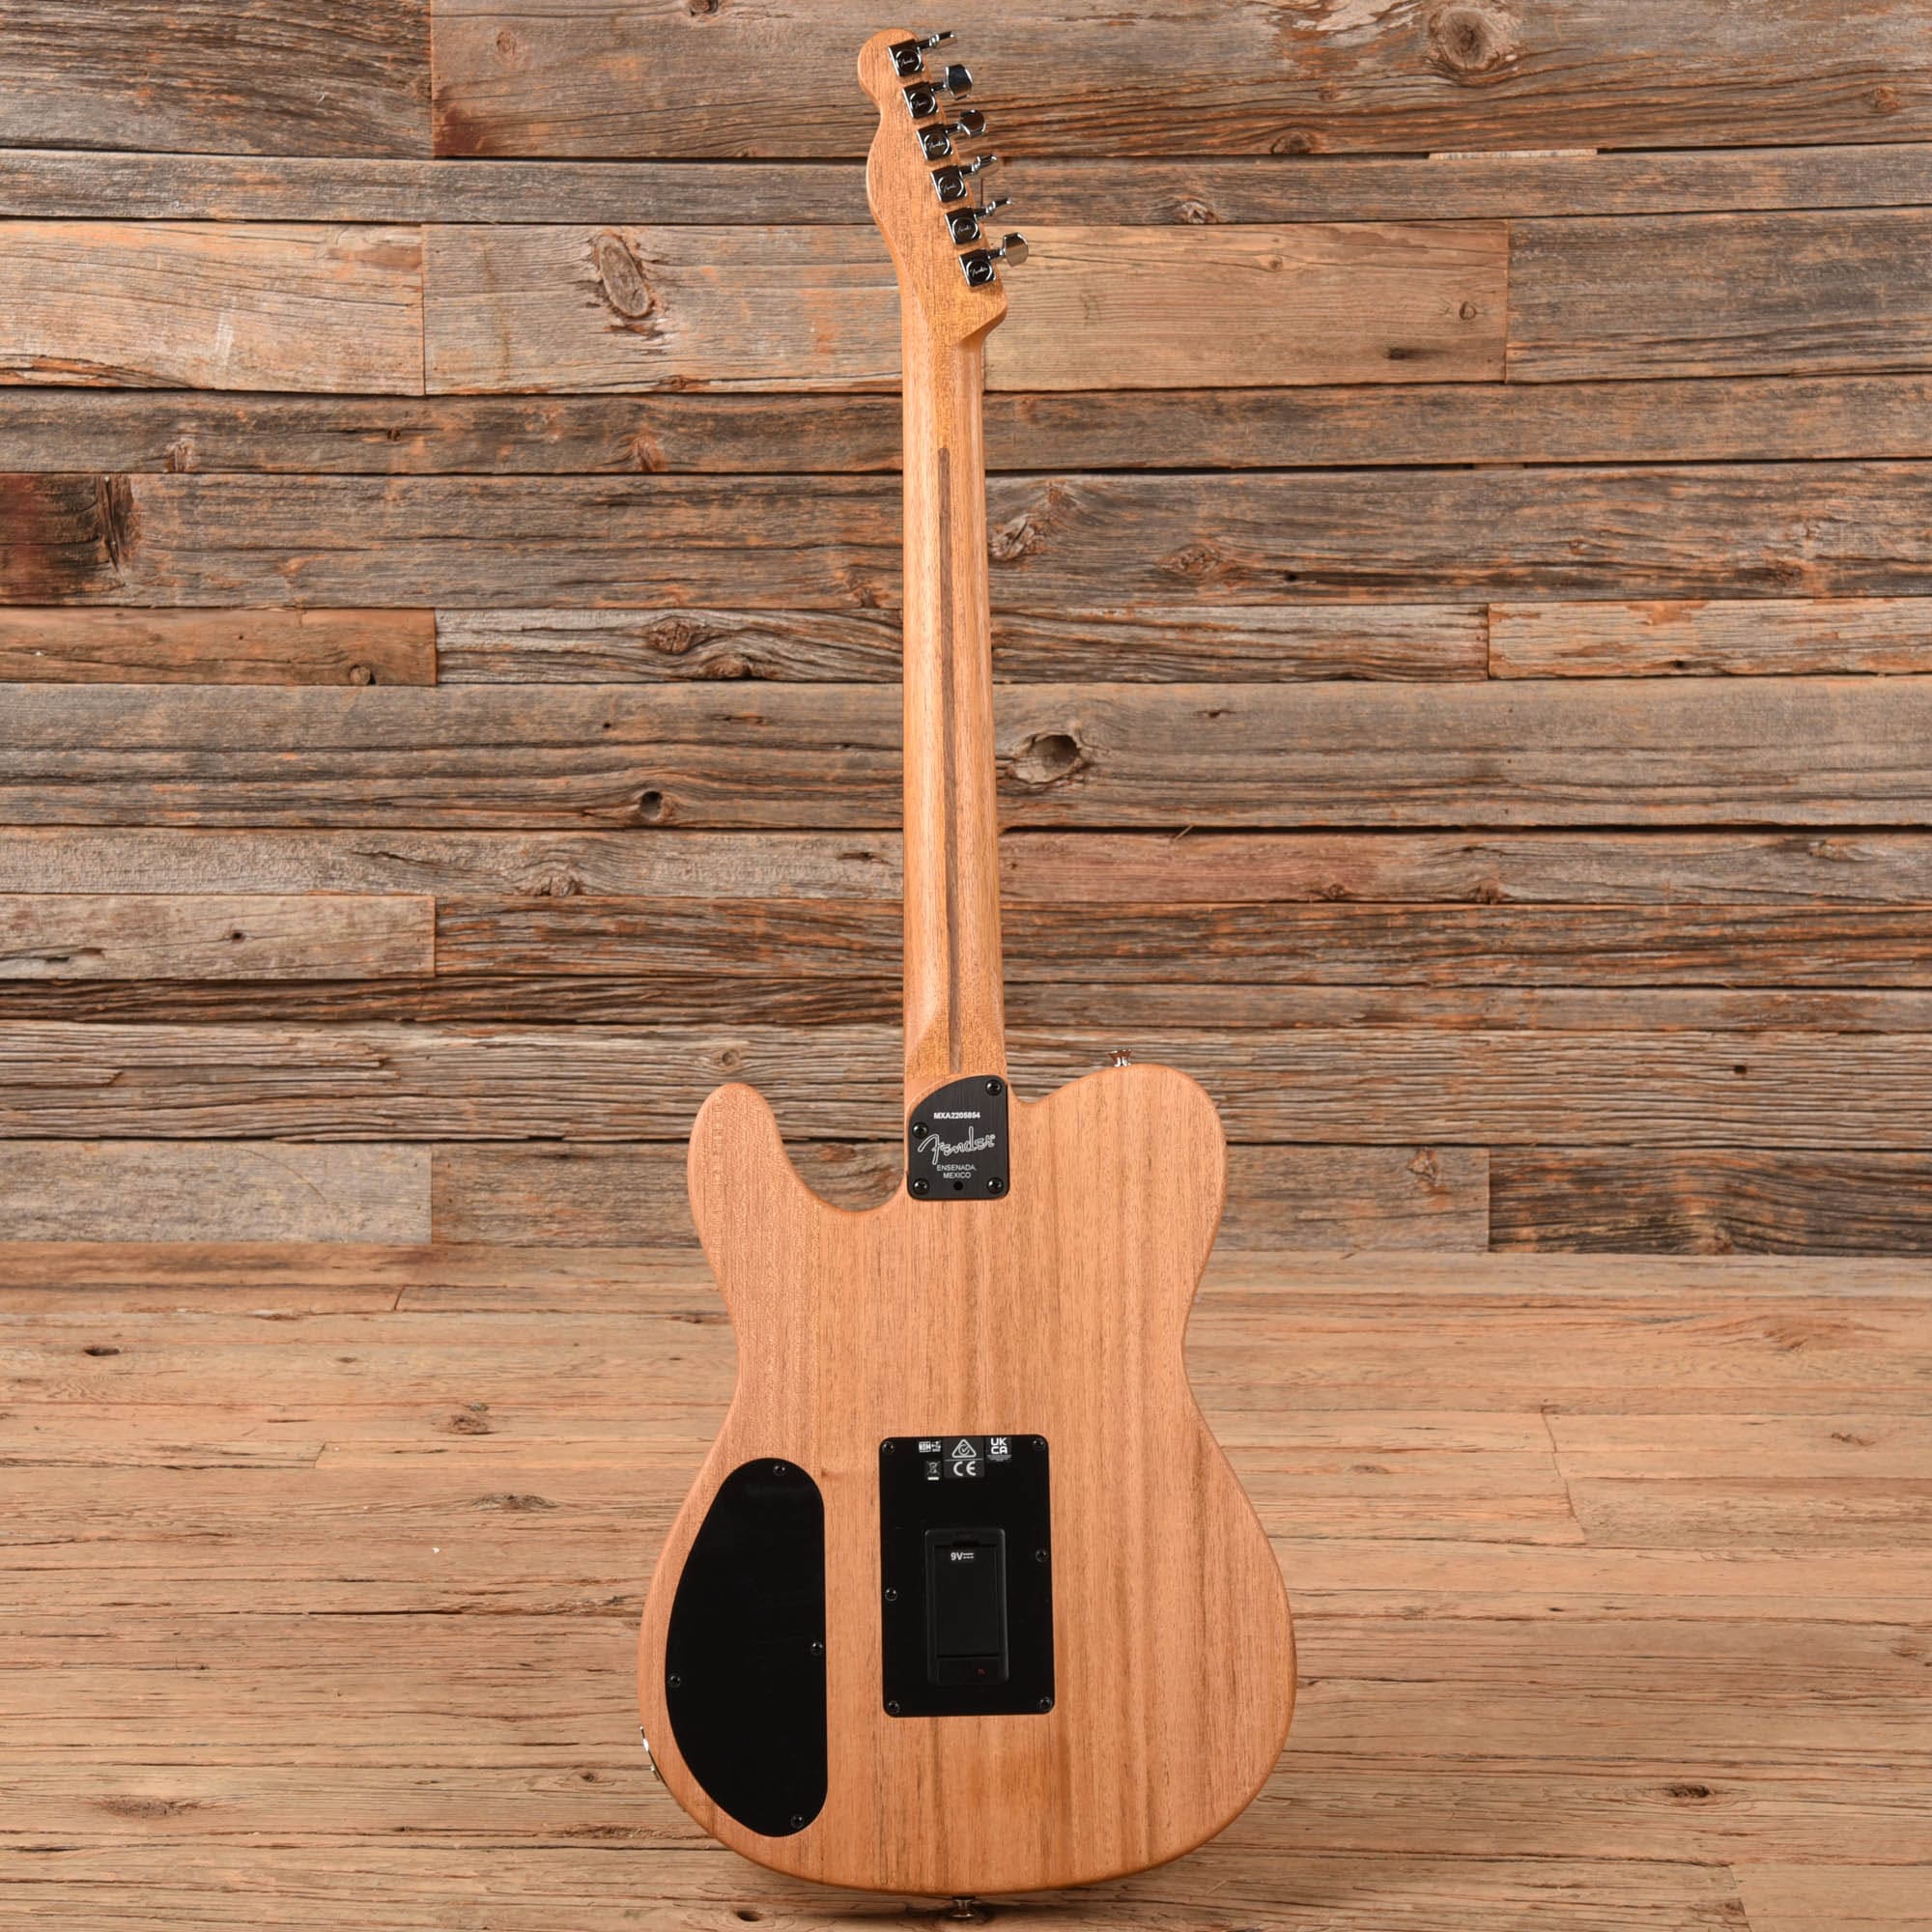 Fender Player Acoustasonic Telecaster Butterscotch Blonde 2022 Electric Guitars / Solid Body